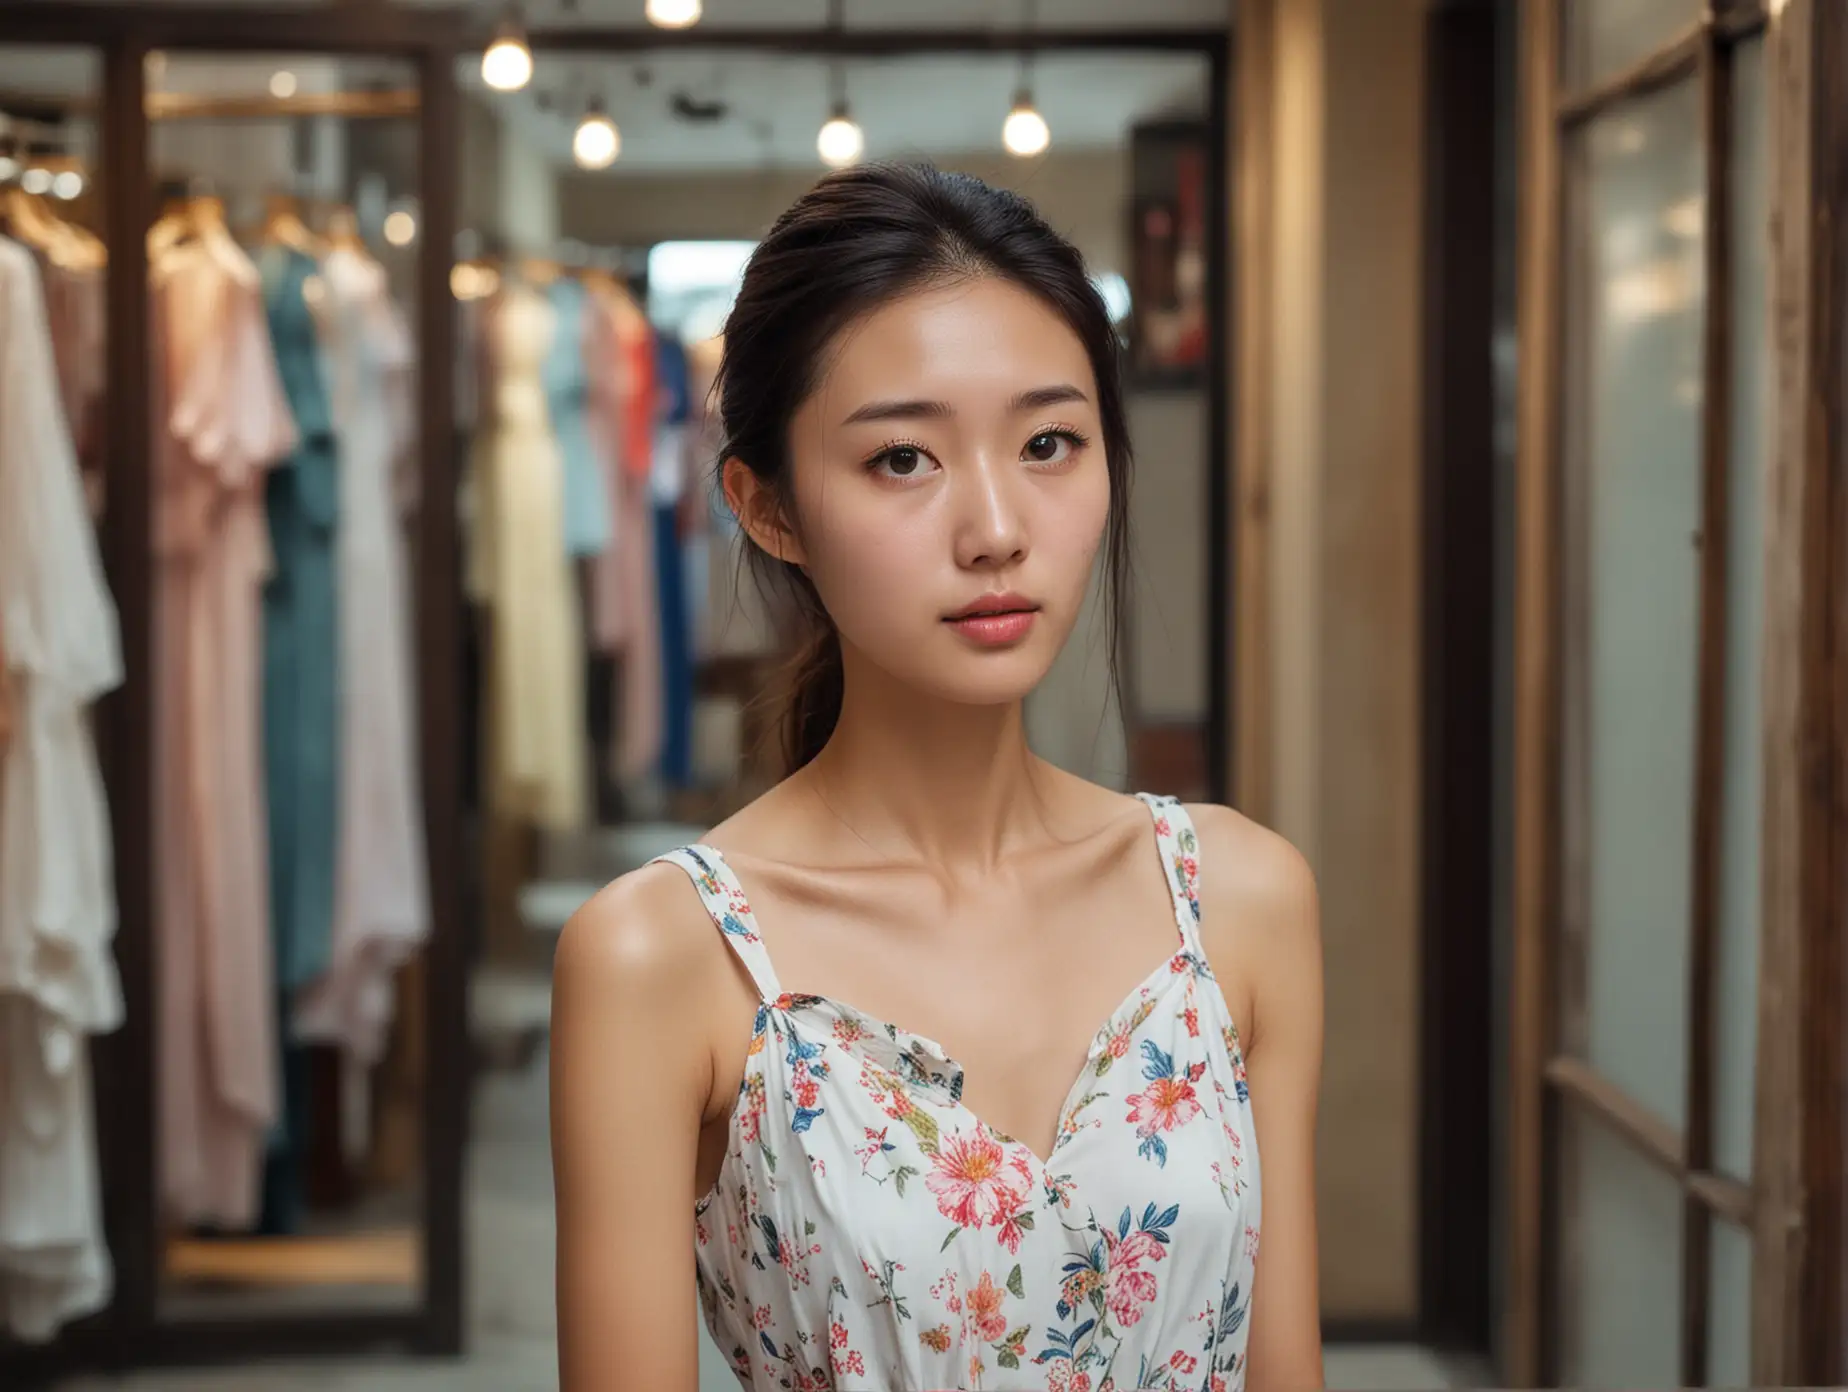 Desperate-Plea-Young-Chinese-Woman-in-Summer-Dress-at-Shanghai-Boutique